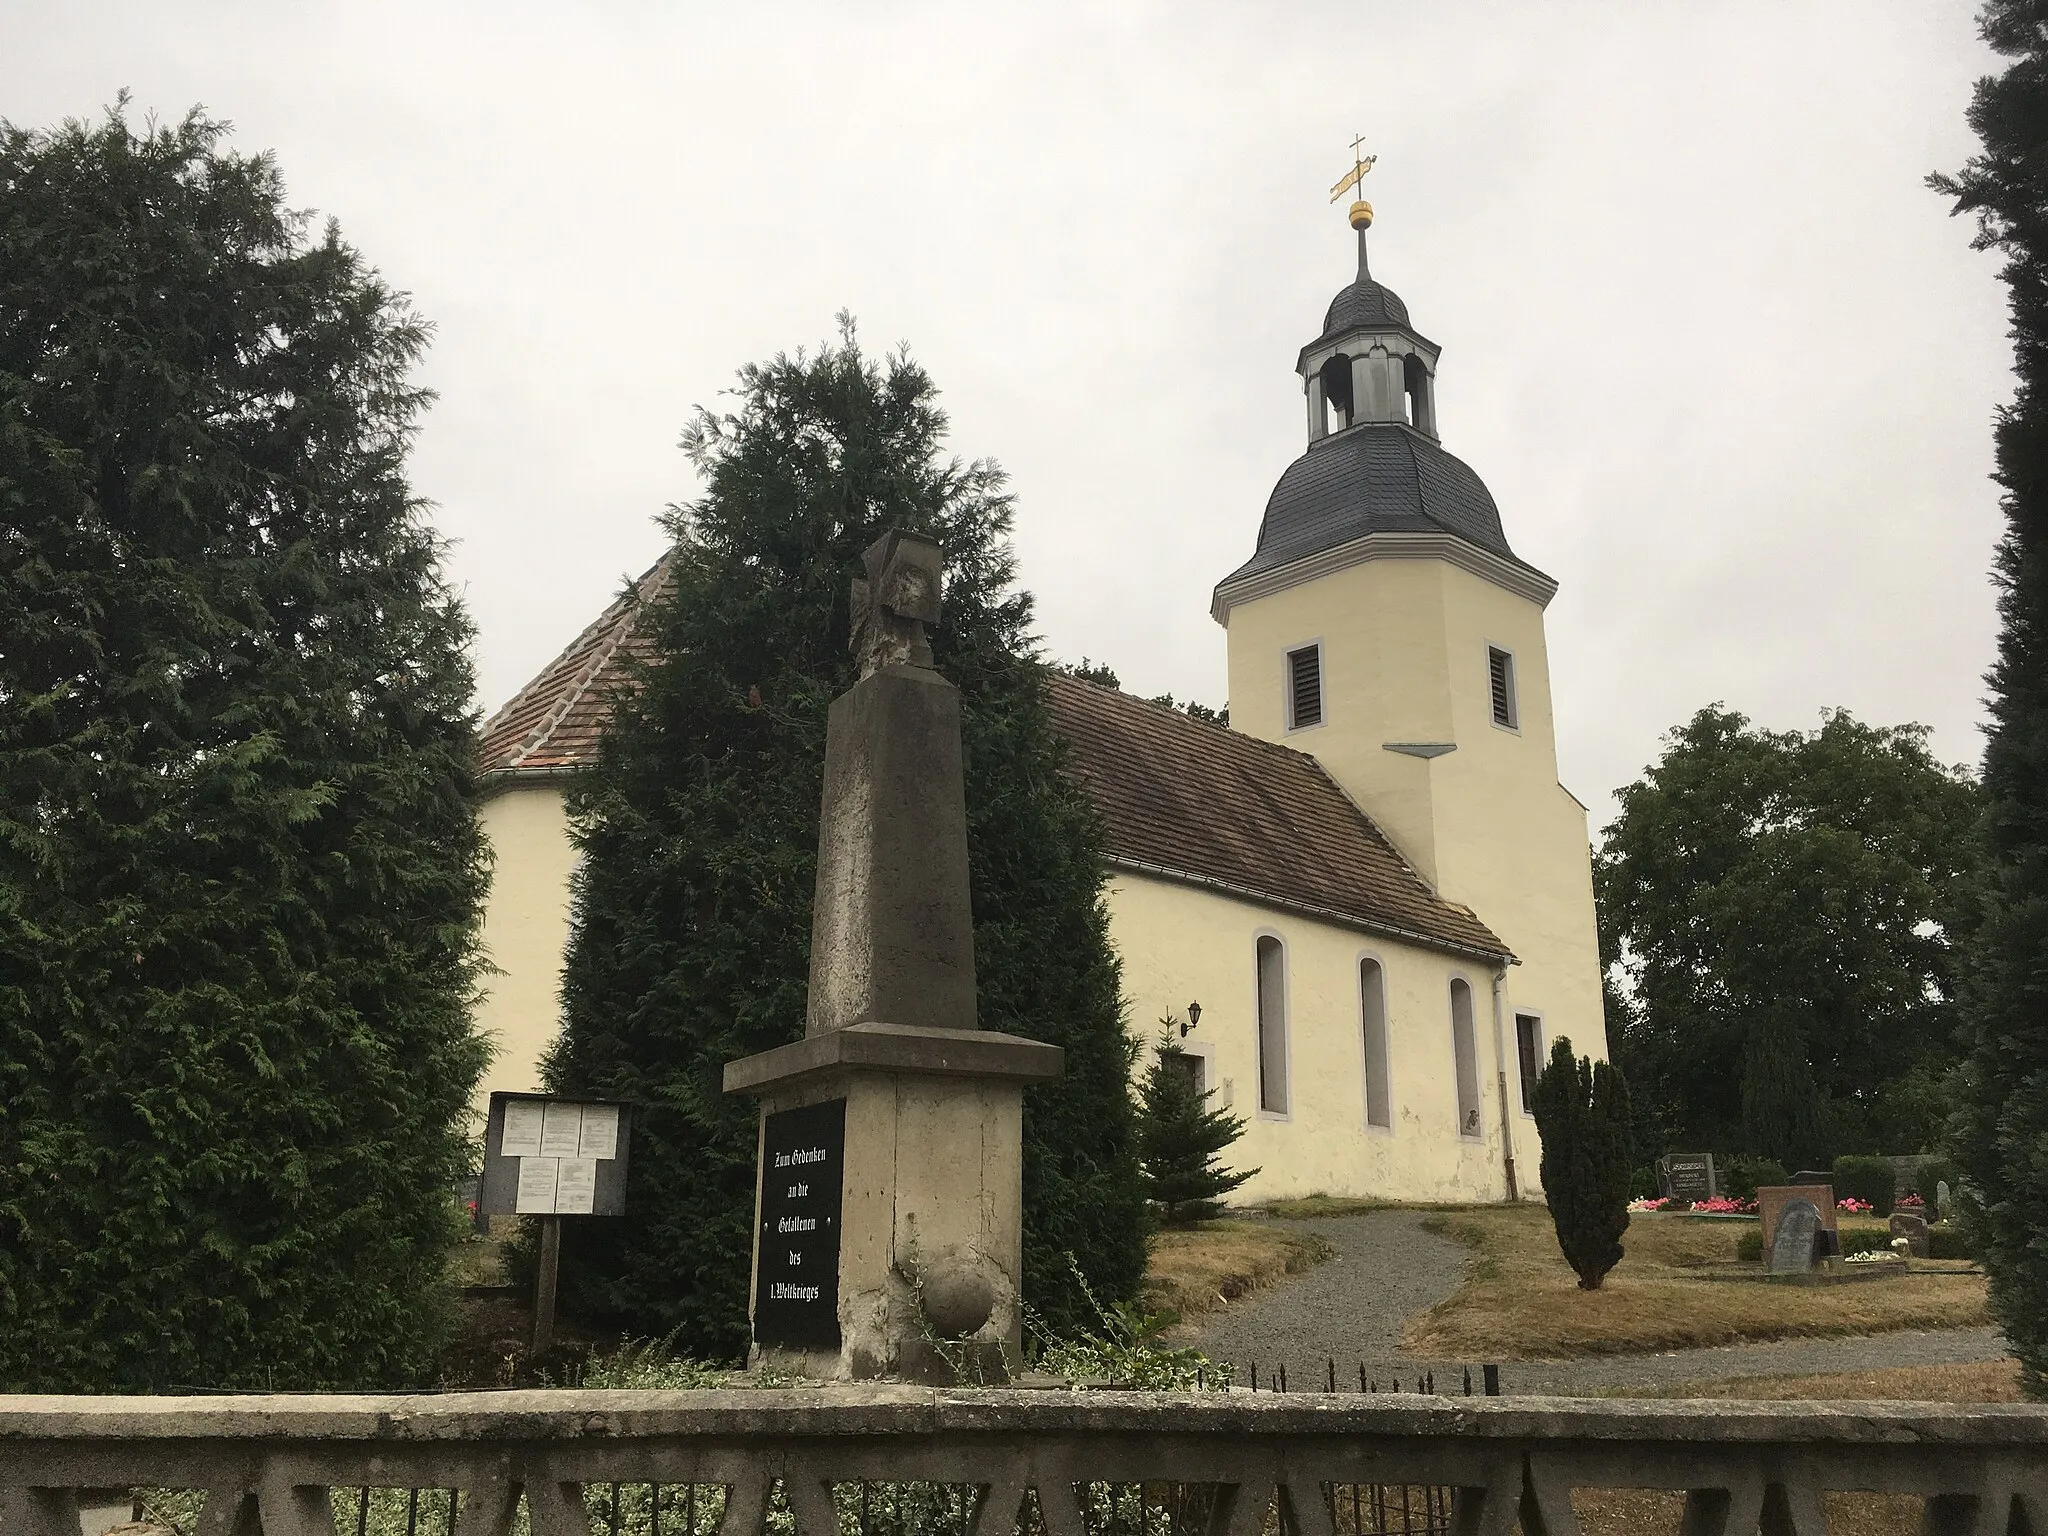 Photo showing: Village church with interior and churchyard cemetry with monument to the fallen of the First World War in Dahlenberg (Trossin), Main street (german: Hauptstraße),
single-aisled hall church: plastered quarry stone construction, gable roof, crown tail cover, basket arch window with flaps, square west tower, oktogonal-shaped in the bell floor, above hood (slate cover), lantern (zinc sheet) inscribed 1781 with segmental arch openings, ball attachment, weather vane and cross, 3/8 choir closure, inside 3-sided wooden gallery, organ gallery with openwork parapet, pulpit renewed in the 20th century (balustrades: depictions of the evangelists around 1620), commemorative plaque inscribed in 1620 (Predella depicting the sacrament and crucifixion, kneeling donor family), wooden crucifix (unmounted/early 20th century). War memorial: rectangular sandstone base, on the front inscription panel of Swedish granite, inscription: "Died the heroic death" [the names of the fallen and missing], on the back: "My people, don't forget the faithful heroes", above rejuvenating sandstone stele with inscription (illegible), attached Iron Cross, on the back of the stele relief of a steel helmet and stick grenades, lateral sandstone cannonballs on the towed pedestal; of importance for building history and local history; cultural heritage monument